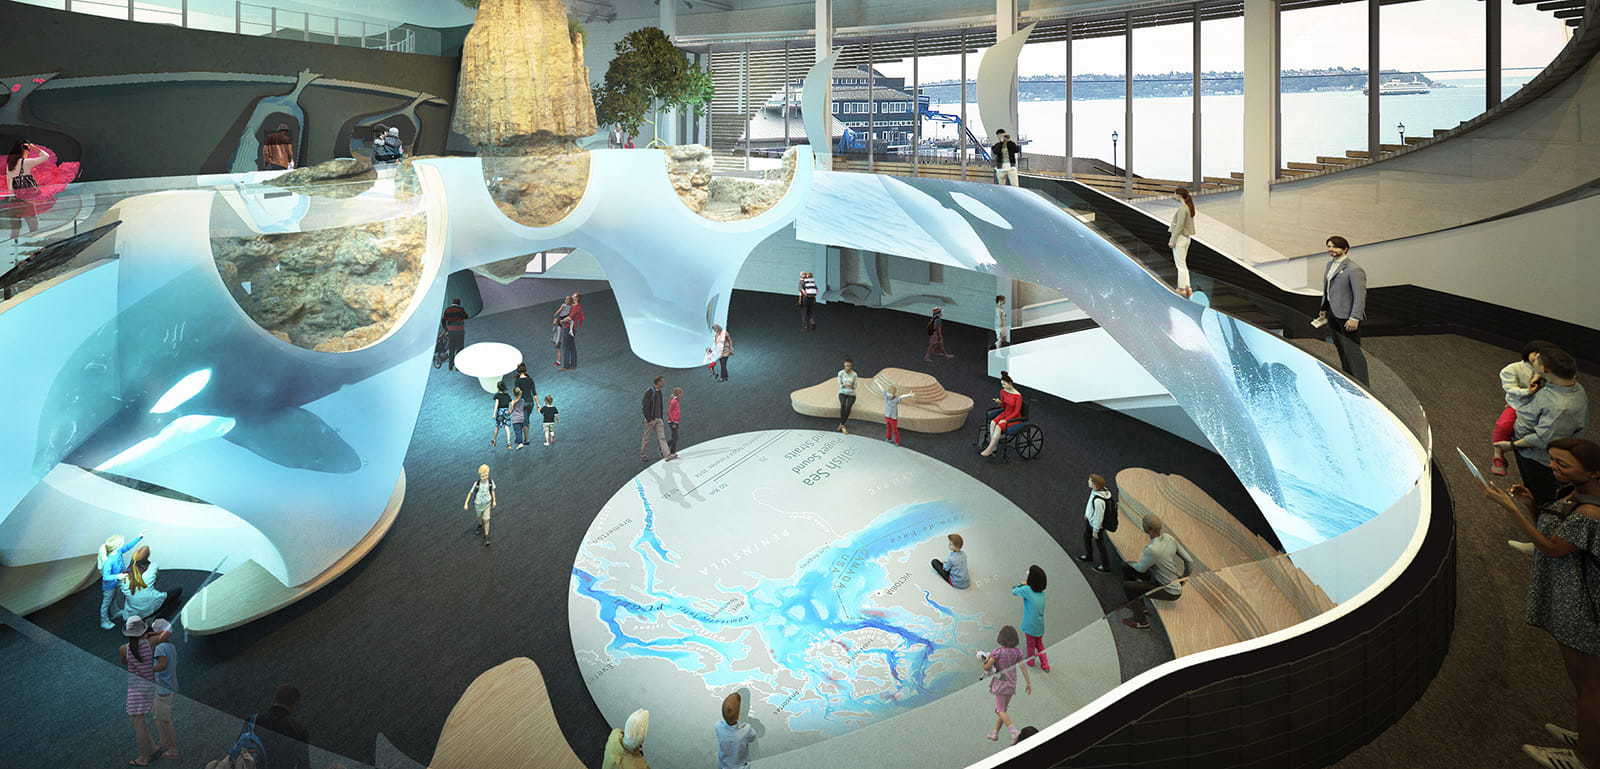 A rendering of the future One Ocean Hall at Ocean Pavilion. A map of the Salish Sea decorates the floor of the first level. The second level contains trees and circular habitats.